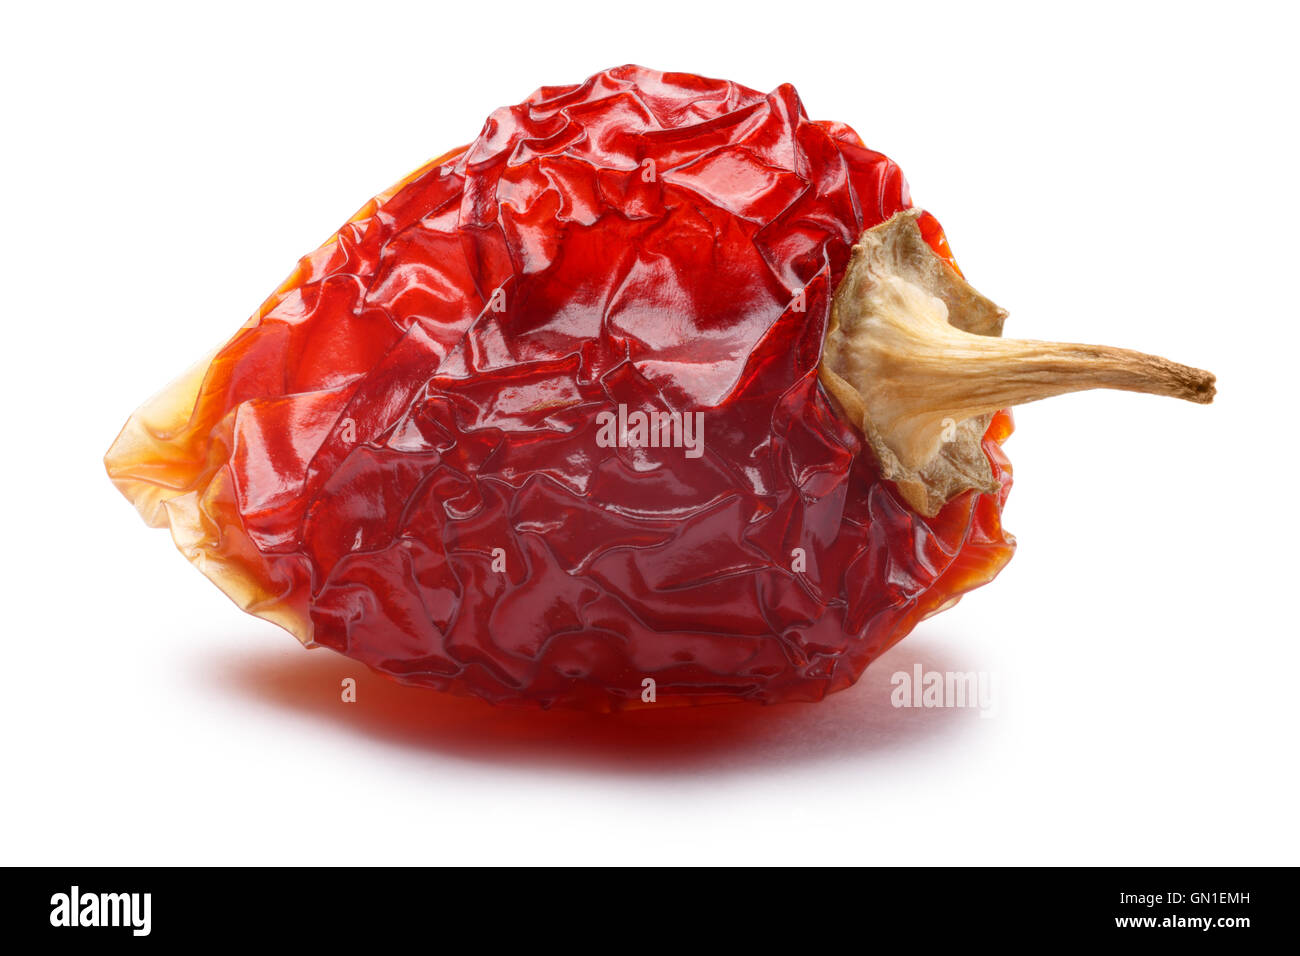 Dried Habanero pepper (Capsicum chinense). Clipping paths, shadow separated Stock Photo